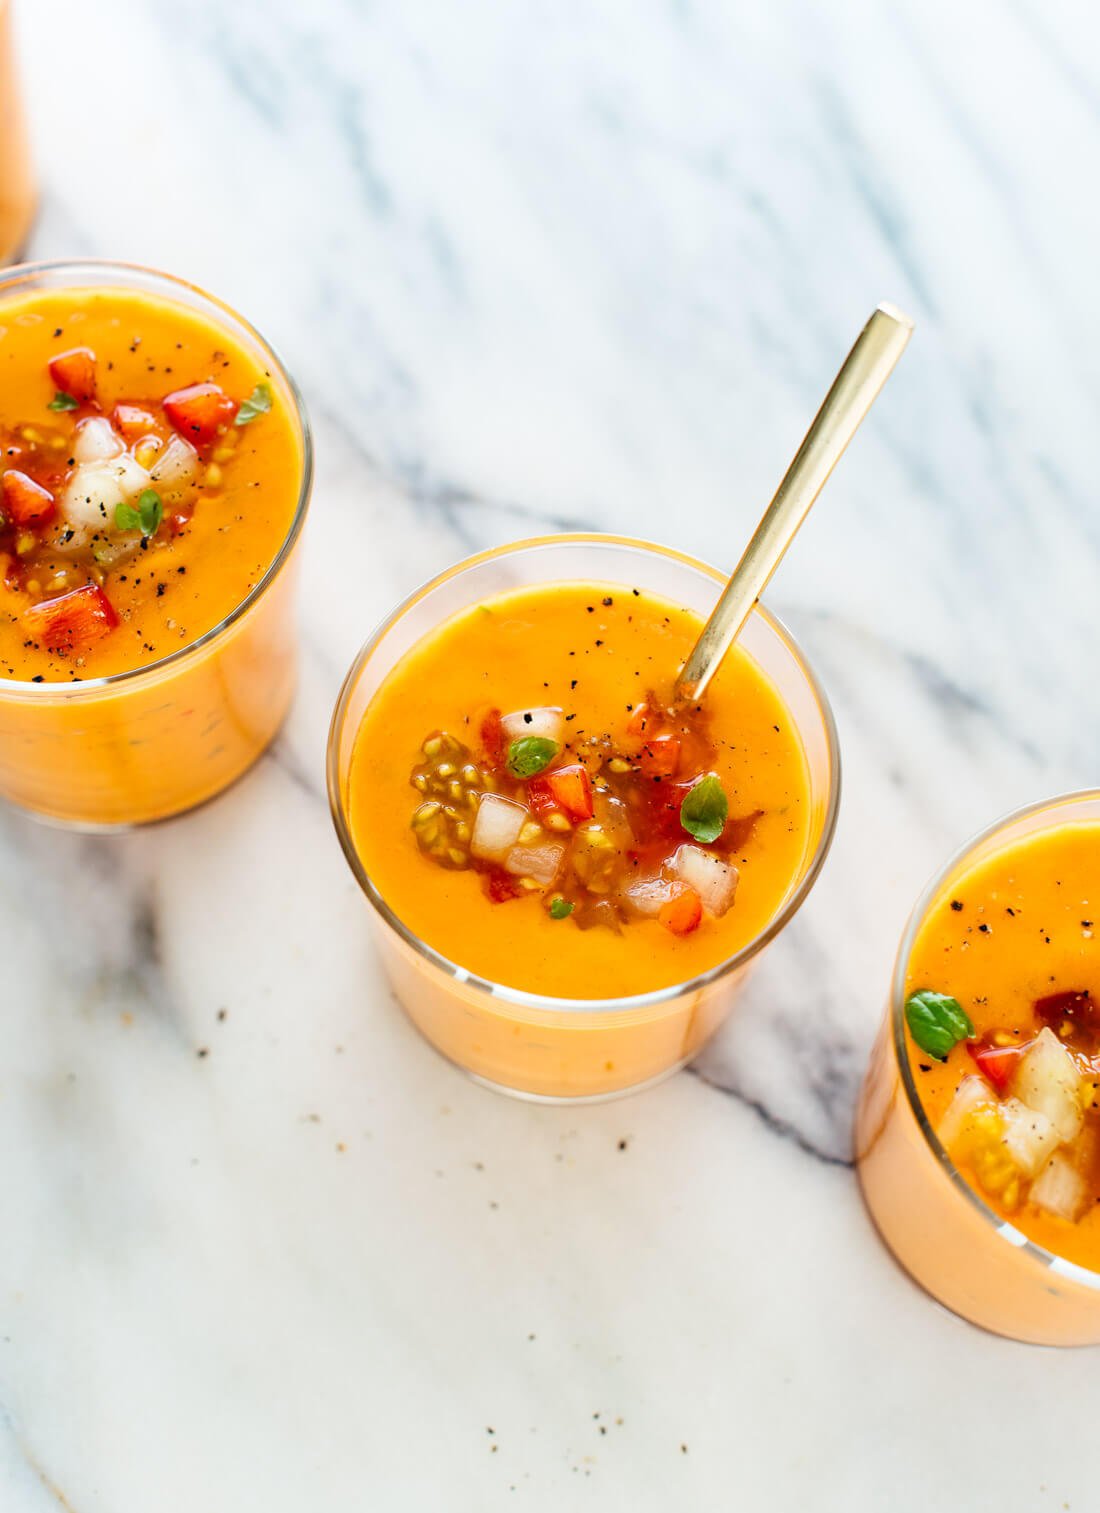 This gazpacho recipe is cool, creamy and refreshing. It's a wonderful summer appetizer, side dish or light meal. cookieandkate.com